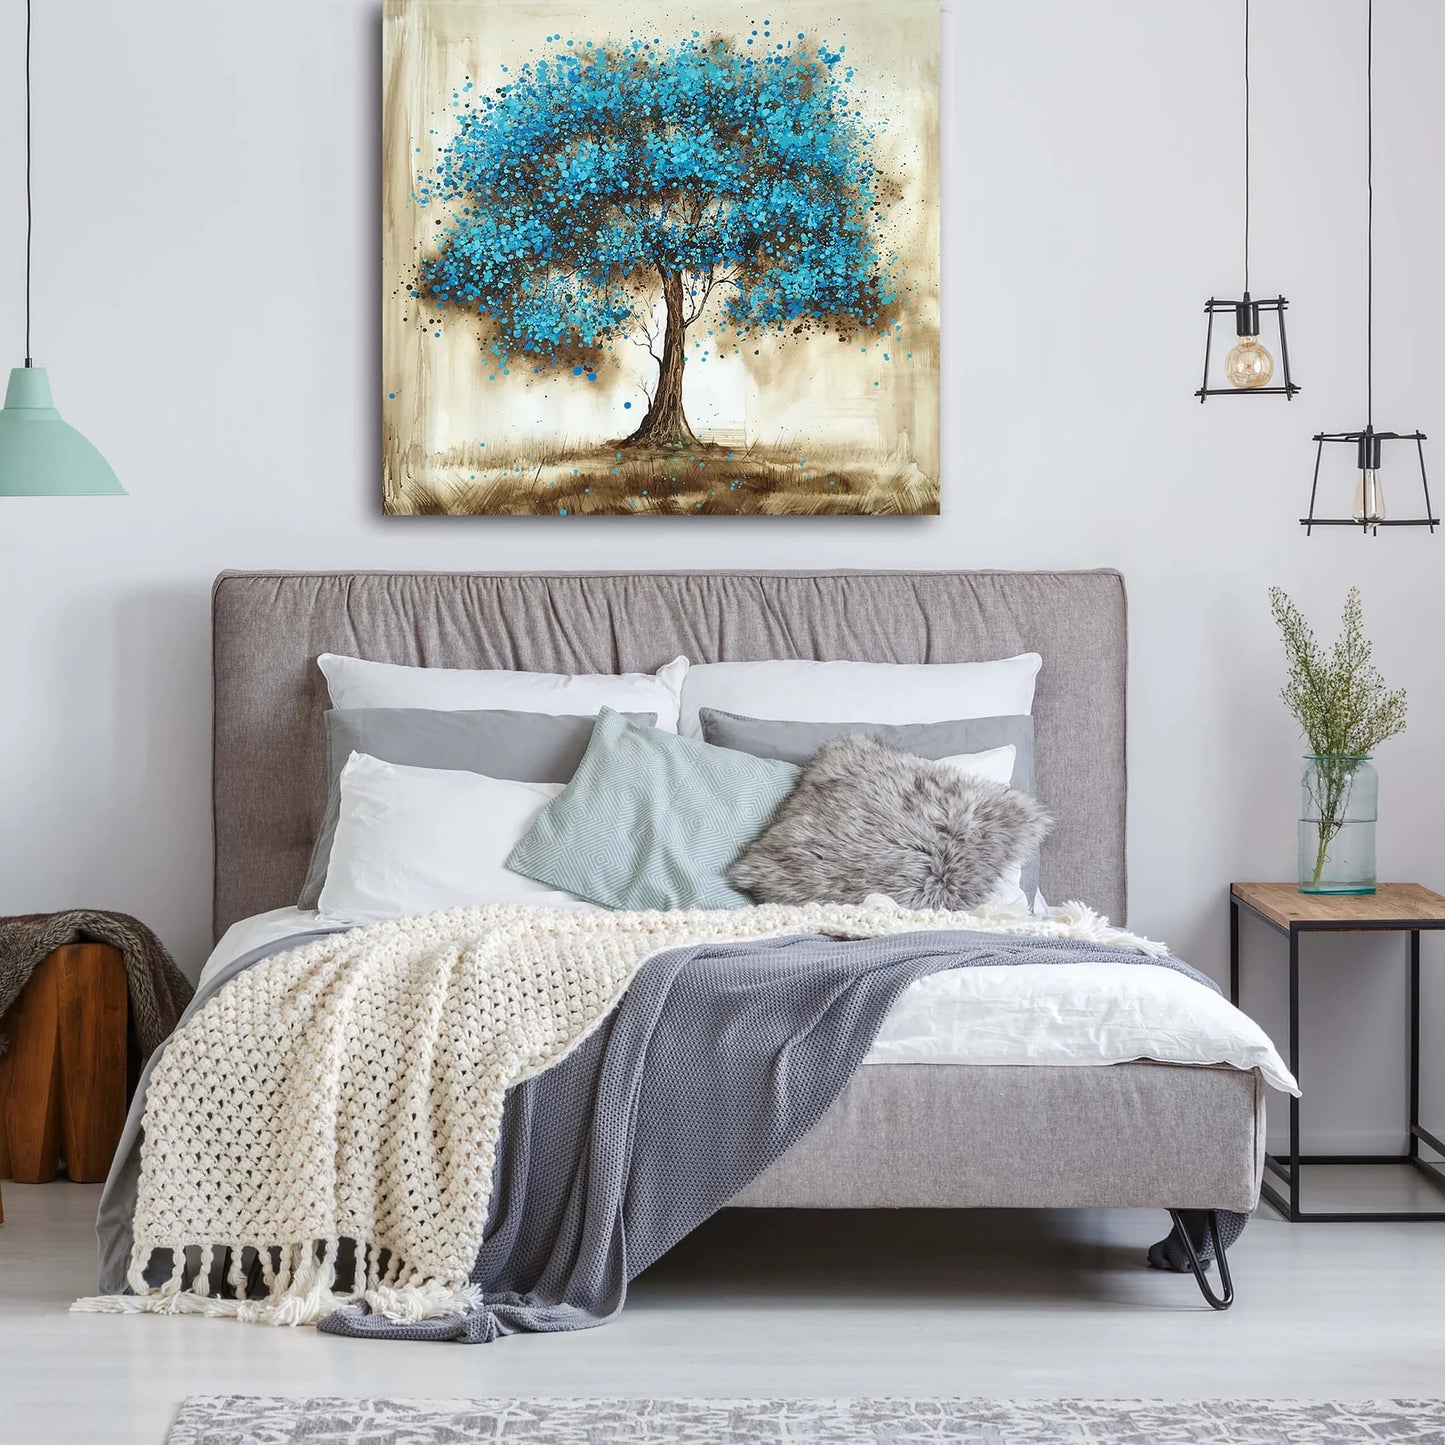 Hand-painted Art "Blue tree in Memory" Oil painting original, Wall art for living room, bedroom, Office, Bar - Wrapped Canvas Painting